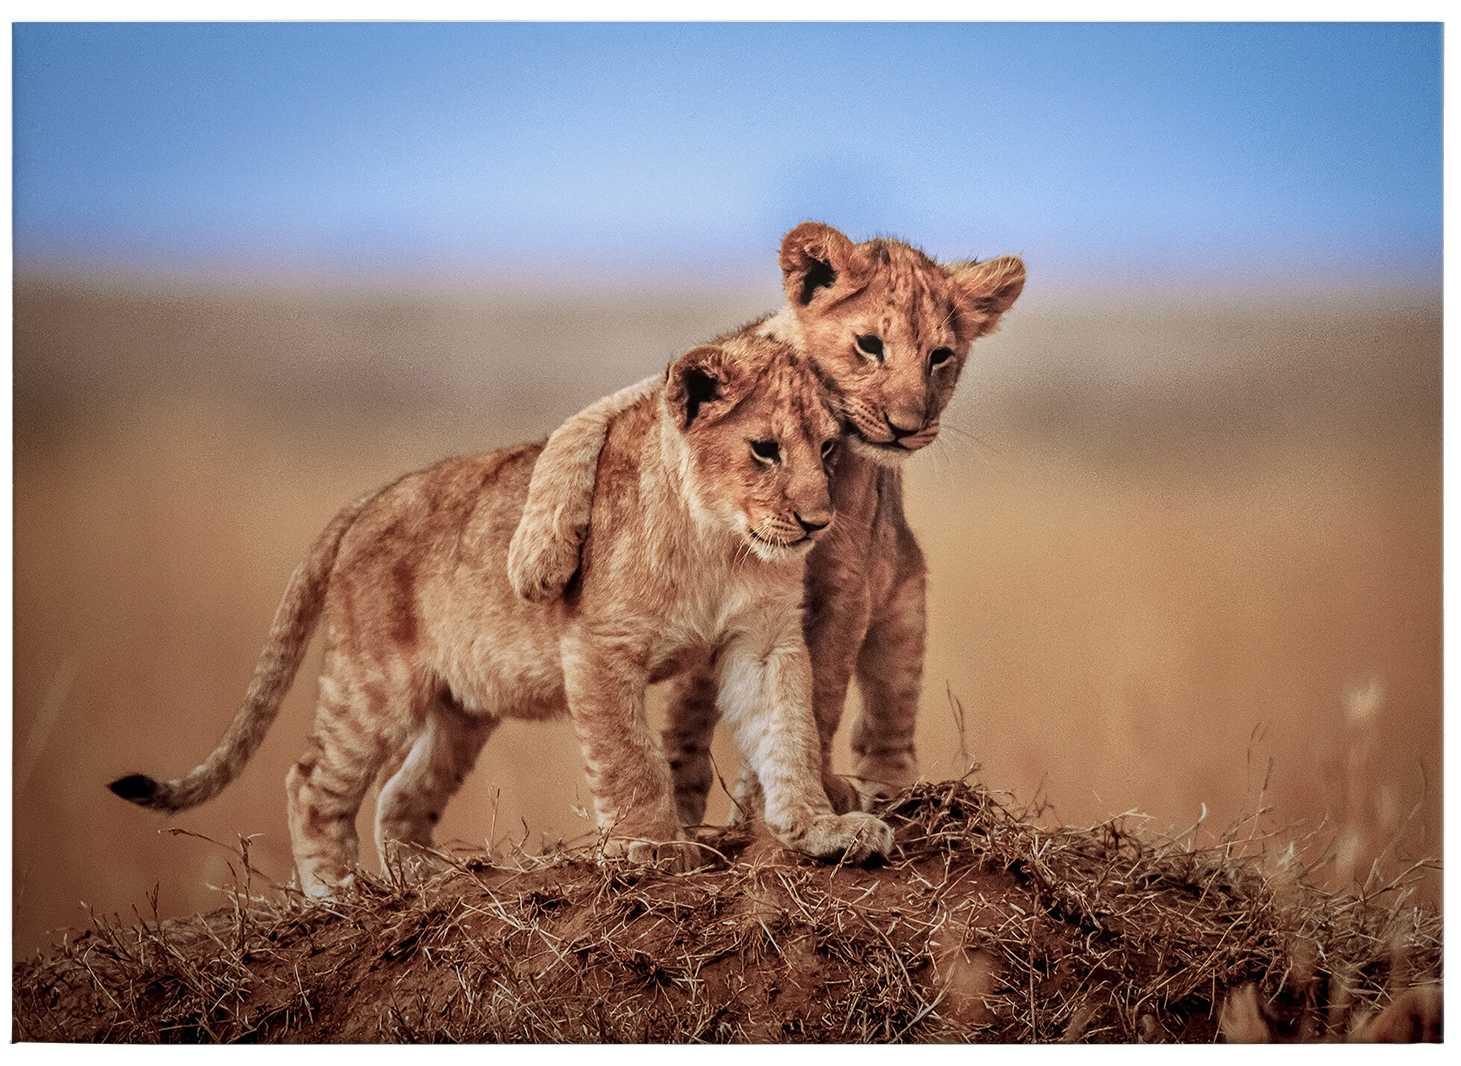             Canvas print little lions at play, nature photographie
        